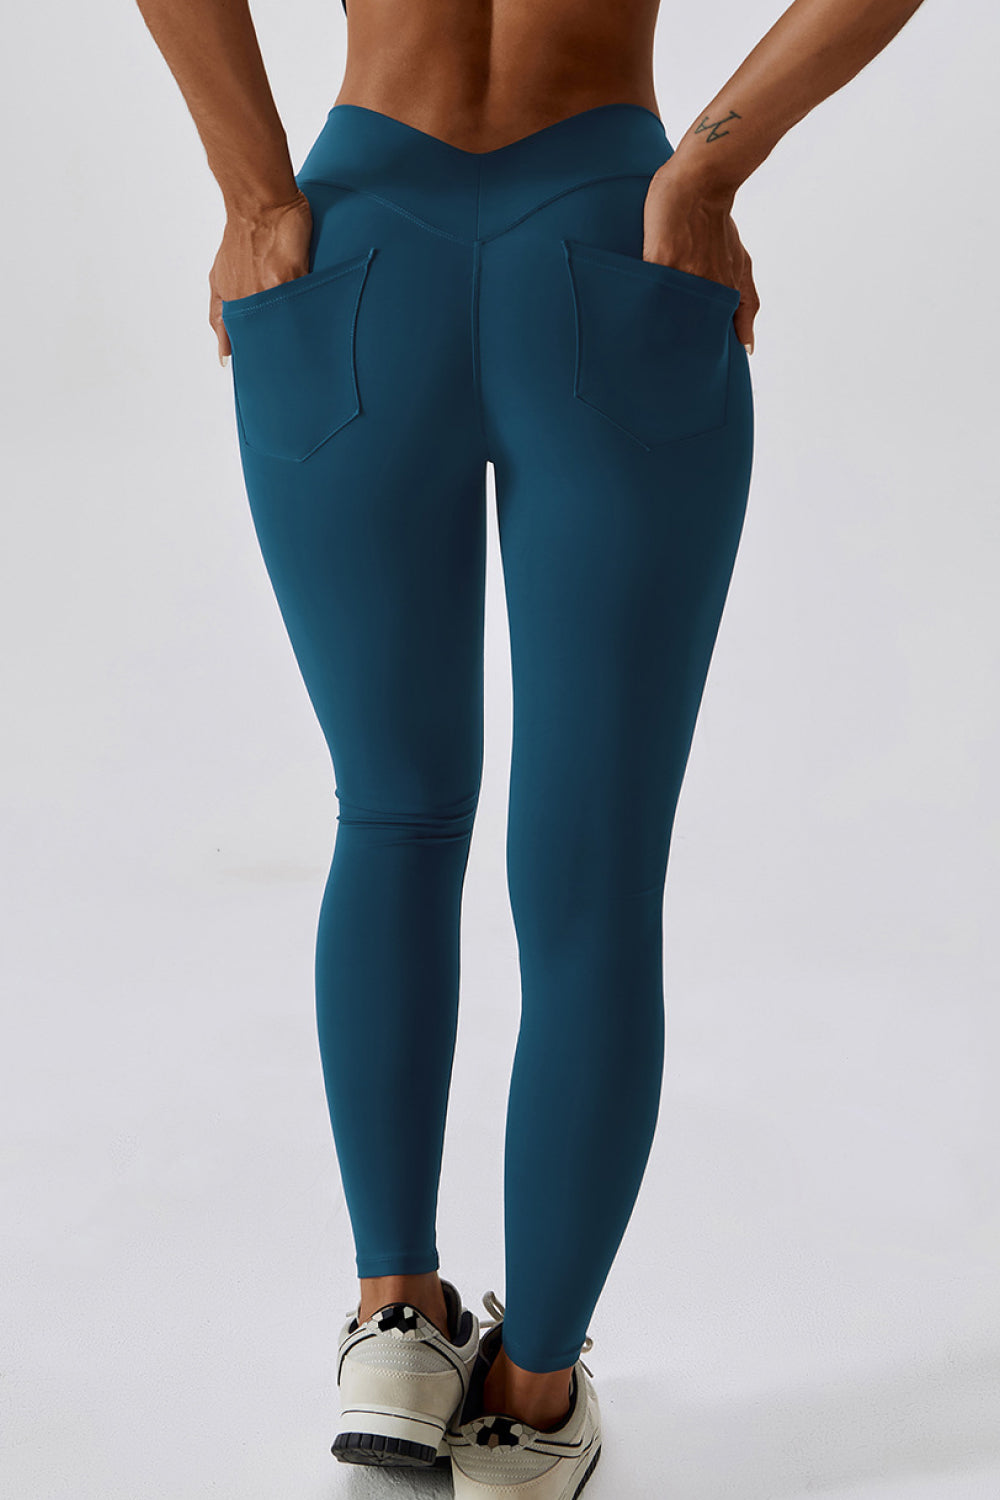 Wide Waistband Slim Fit Back Pocket Sports Leggings – A Better You